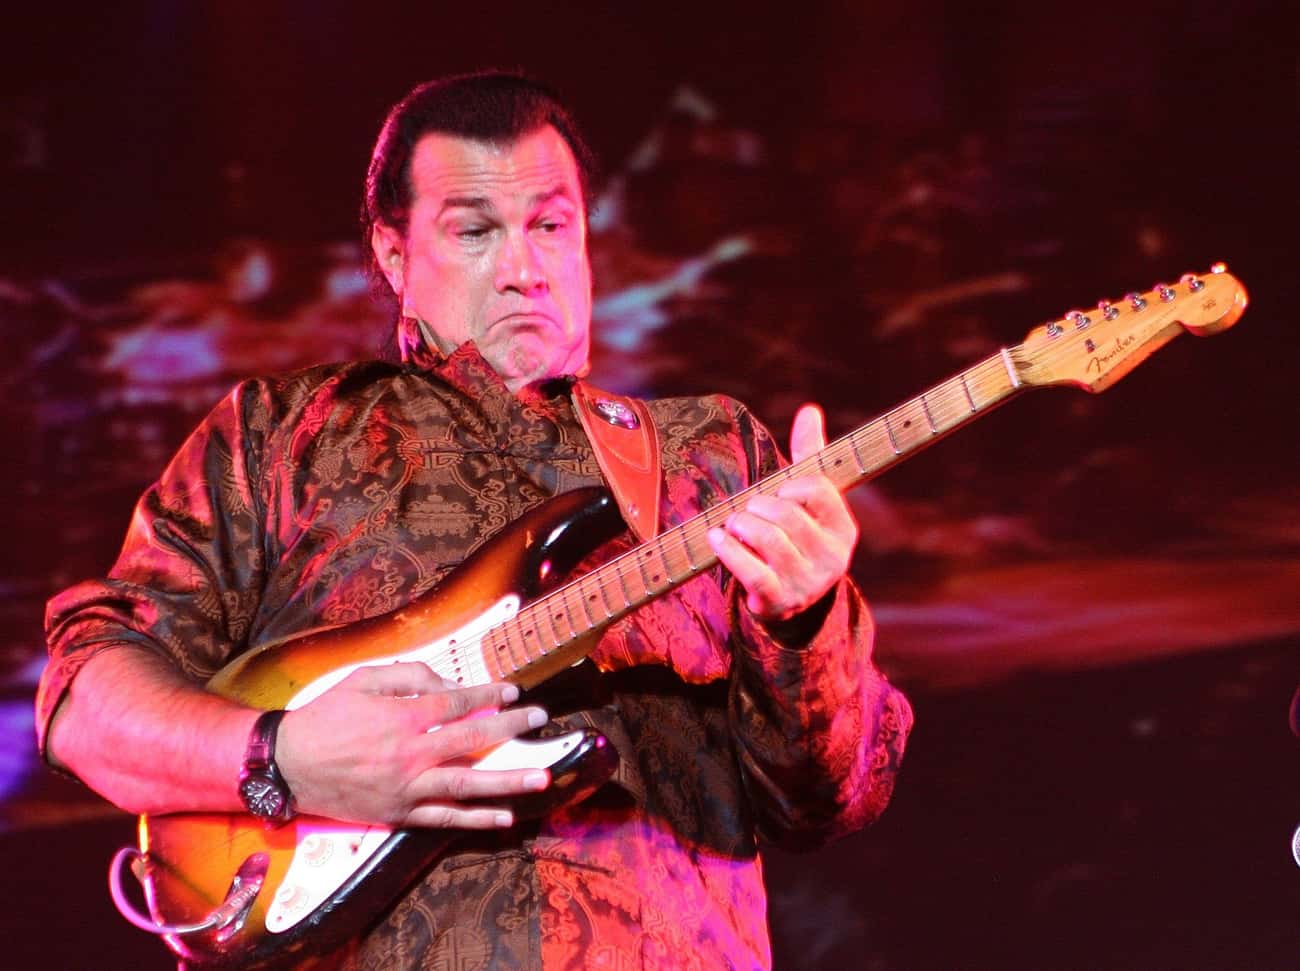 Dux Claims He Was Offered $25,000 To Kill Steven Seagal